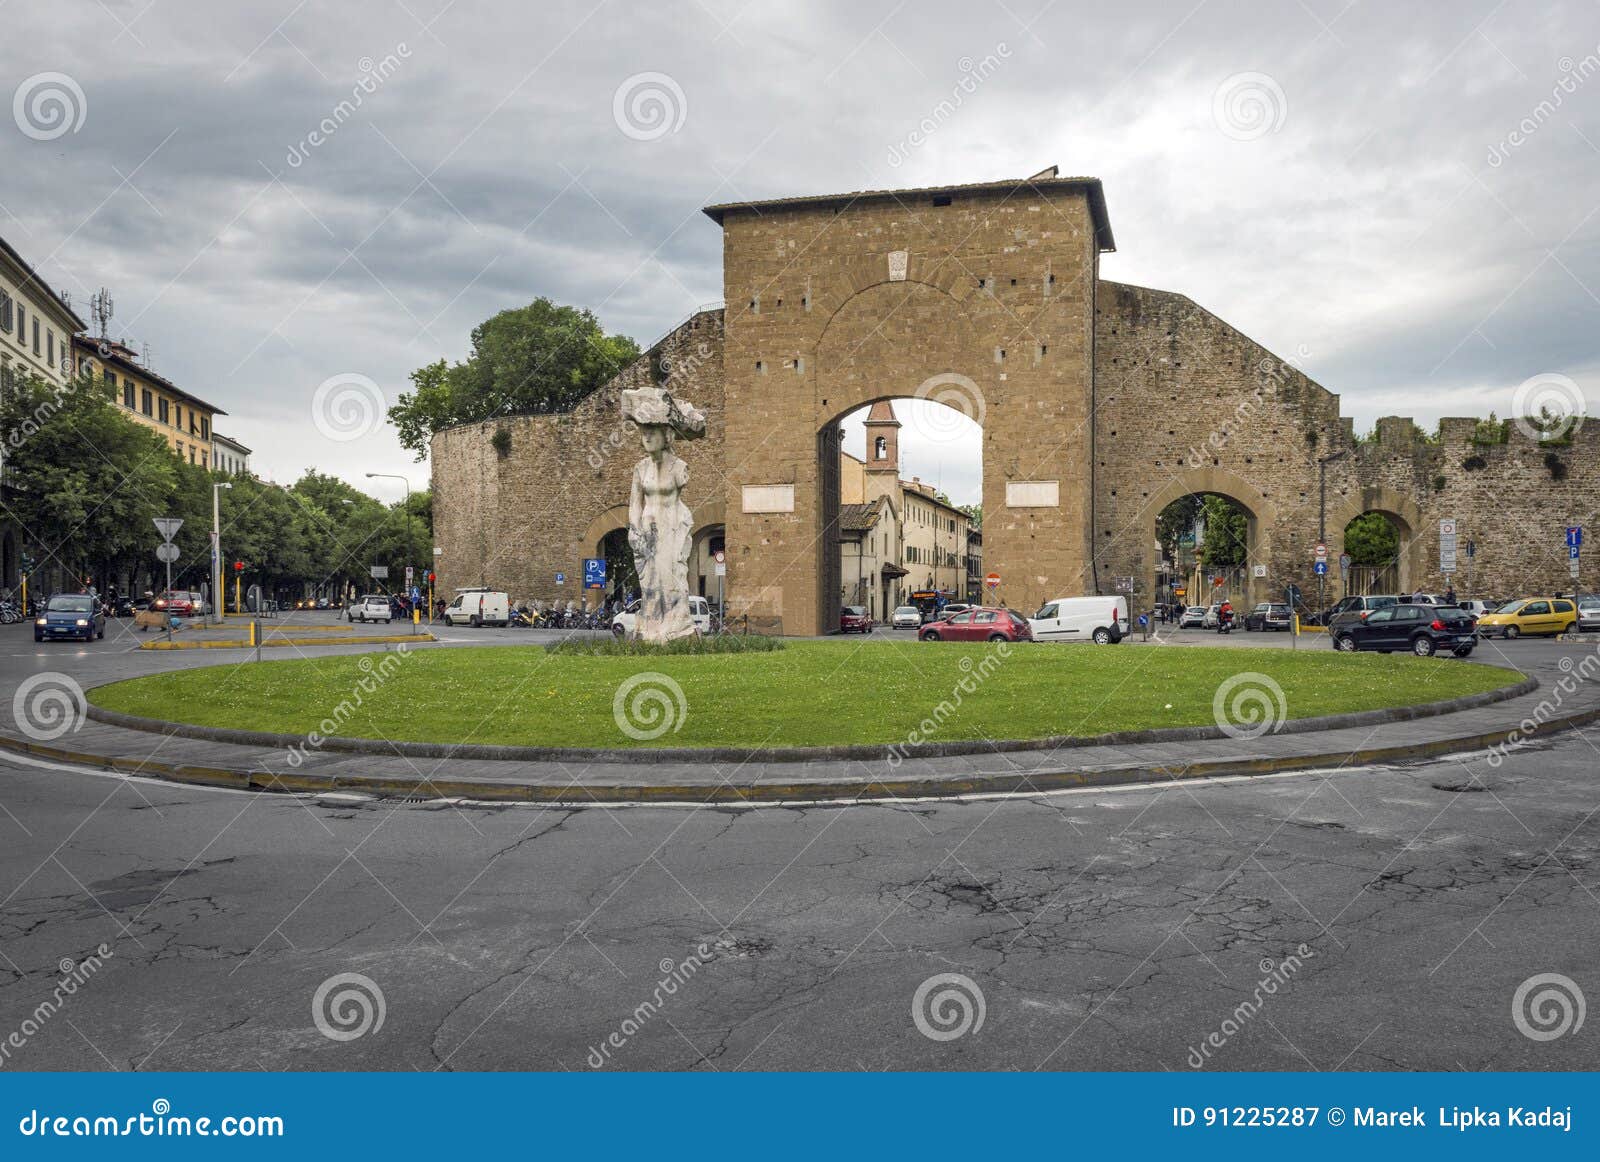 Porta Romana in Florence stock image. Image of entrance - 91225287